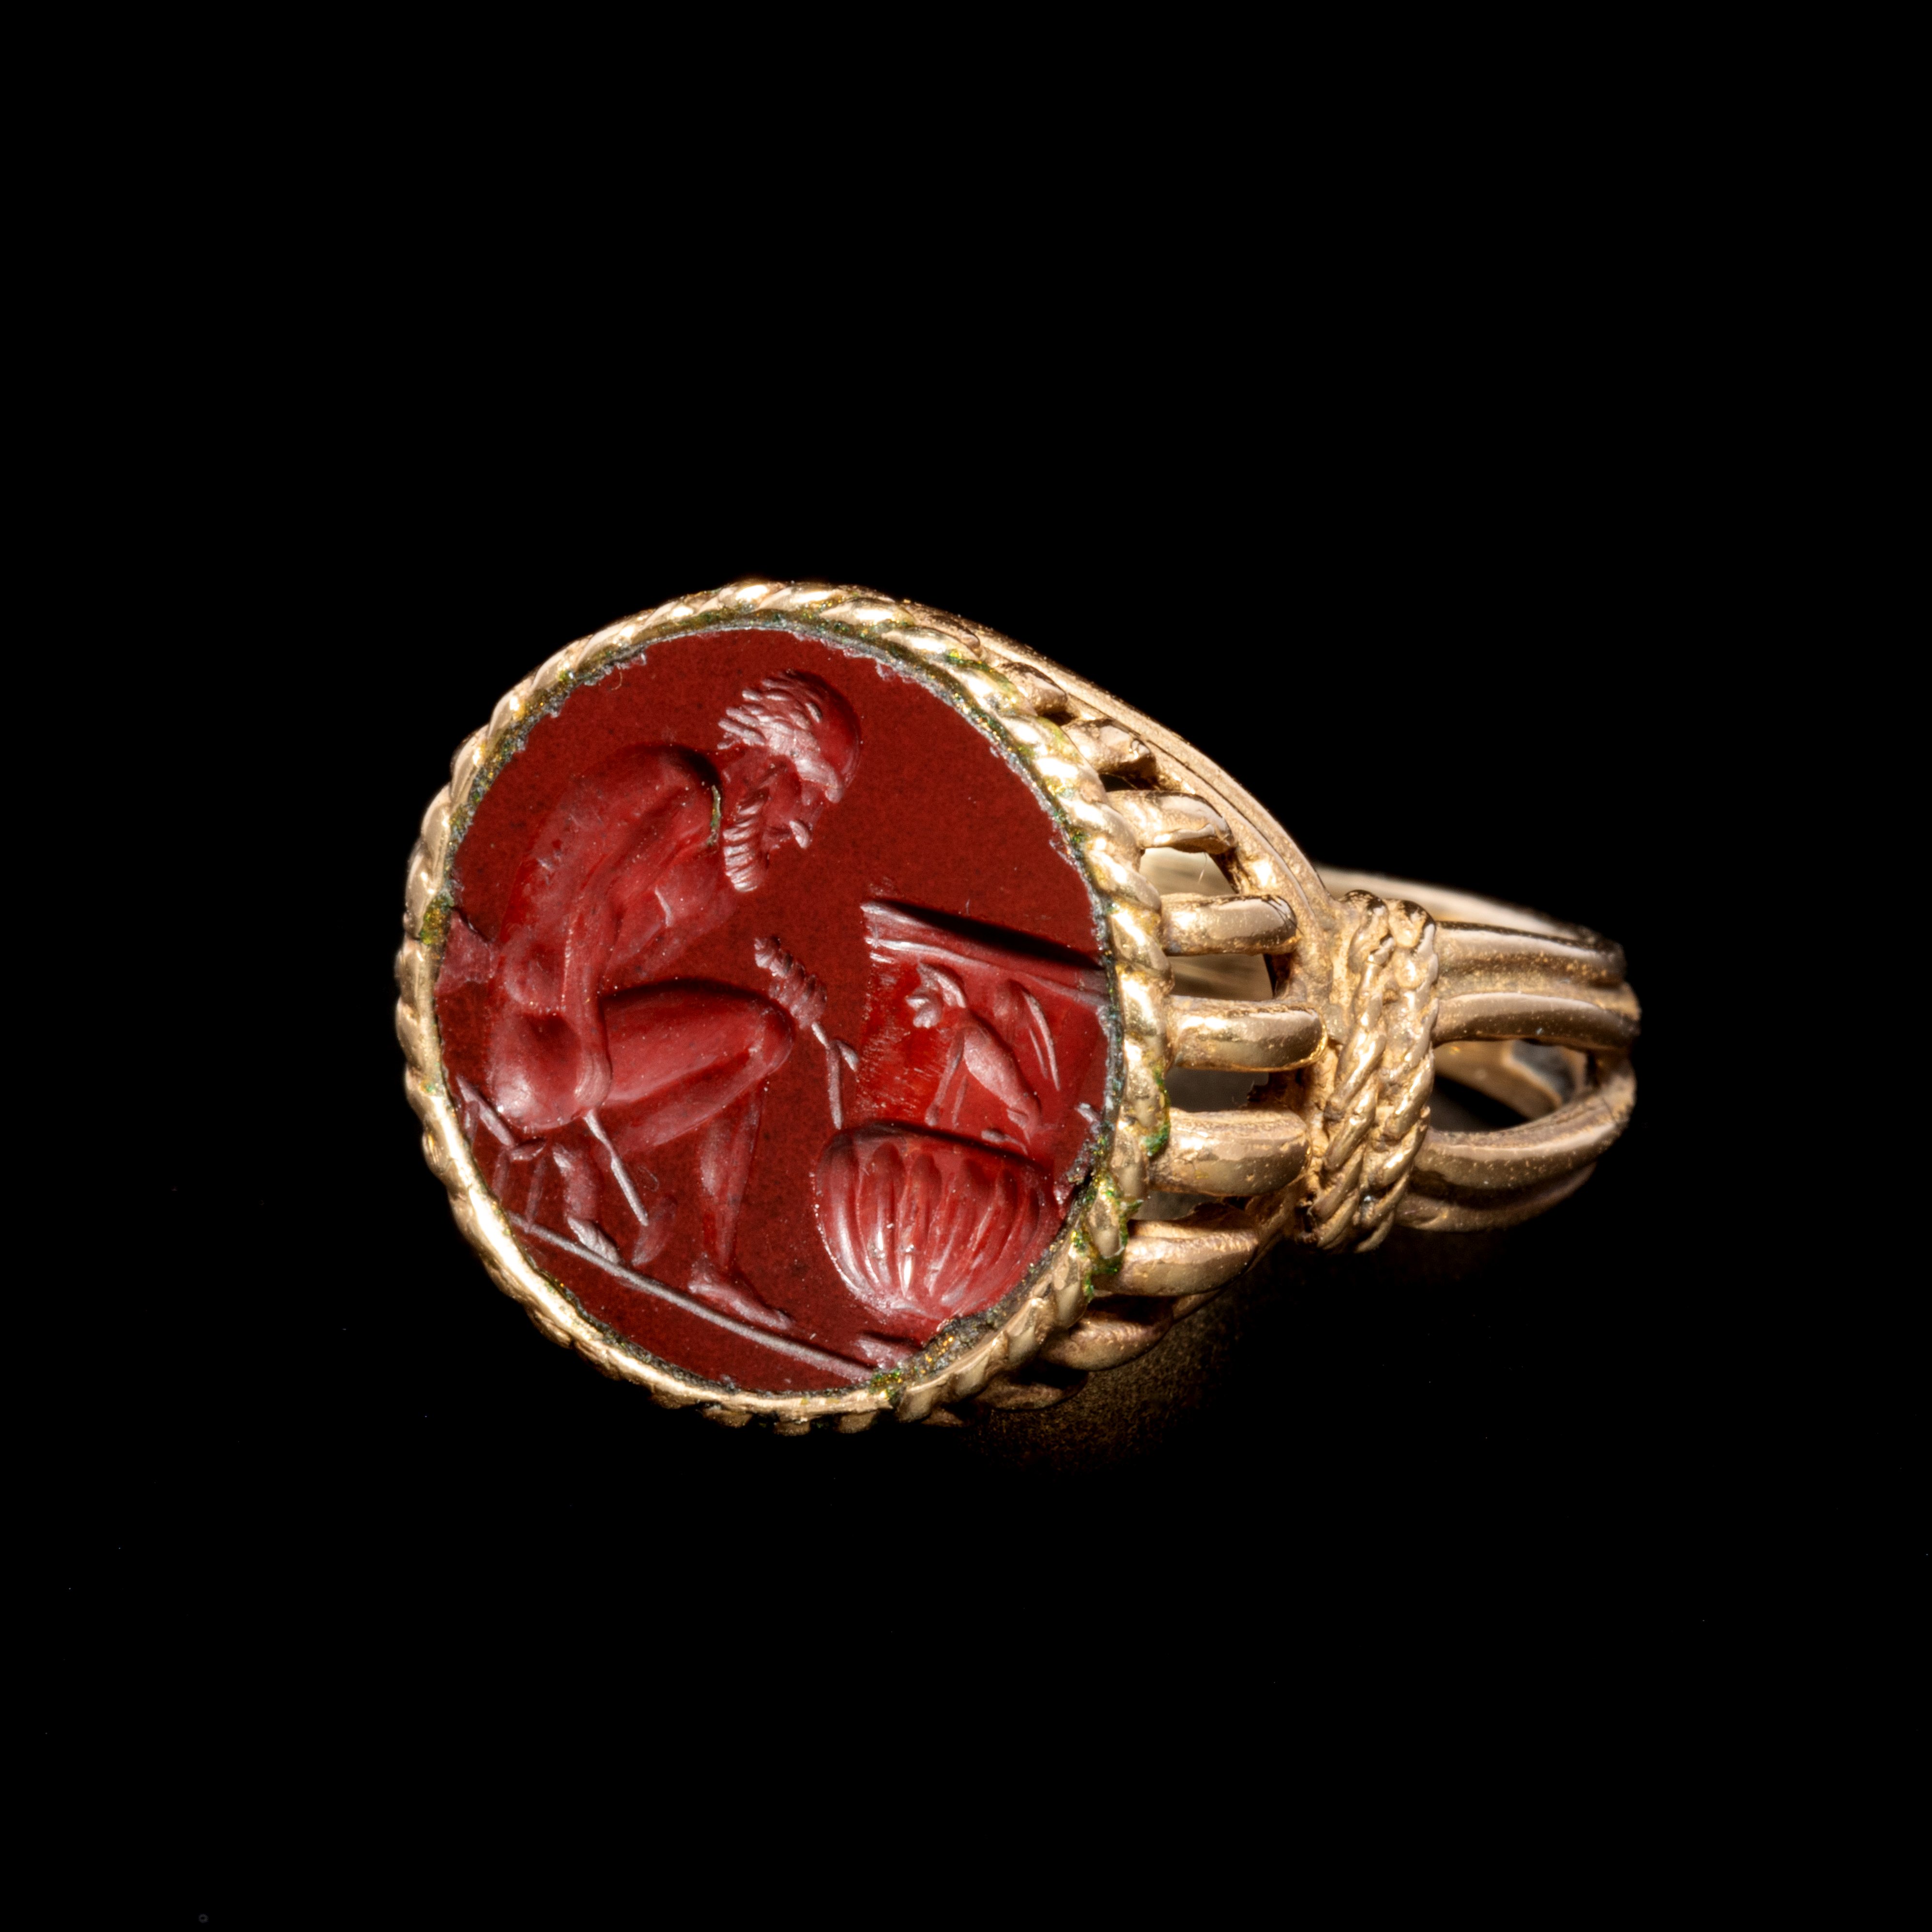 A Roman Red Jasper Ring Stone of a Nude Sculptor Ring size 7 1/2; Length of stone 9/16 inch (1.4 cm) - Image 2 of 3